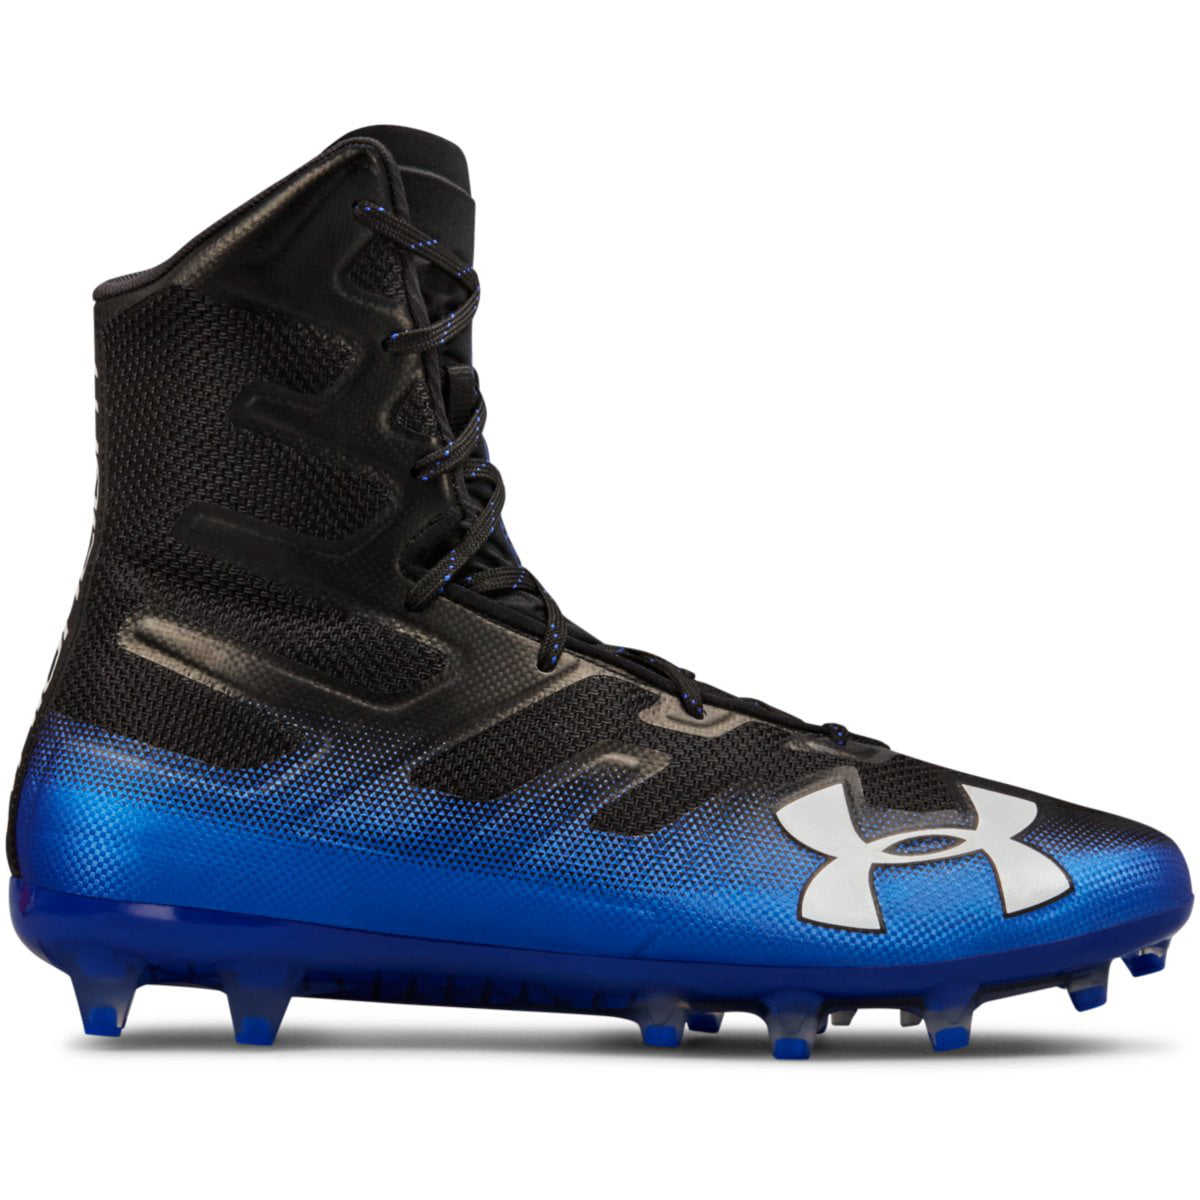 Details about   Under Armour Highlight MC LE Football Cleats Ohio 1275479-611 Men Size 11.5 NEW 